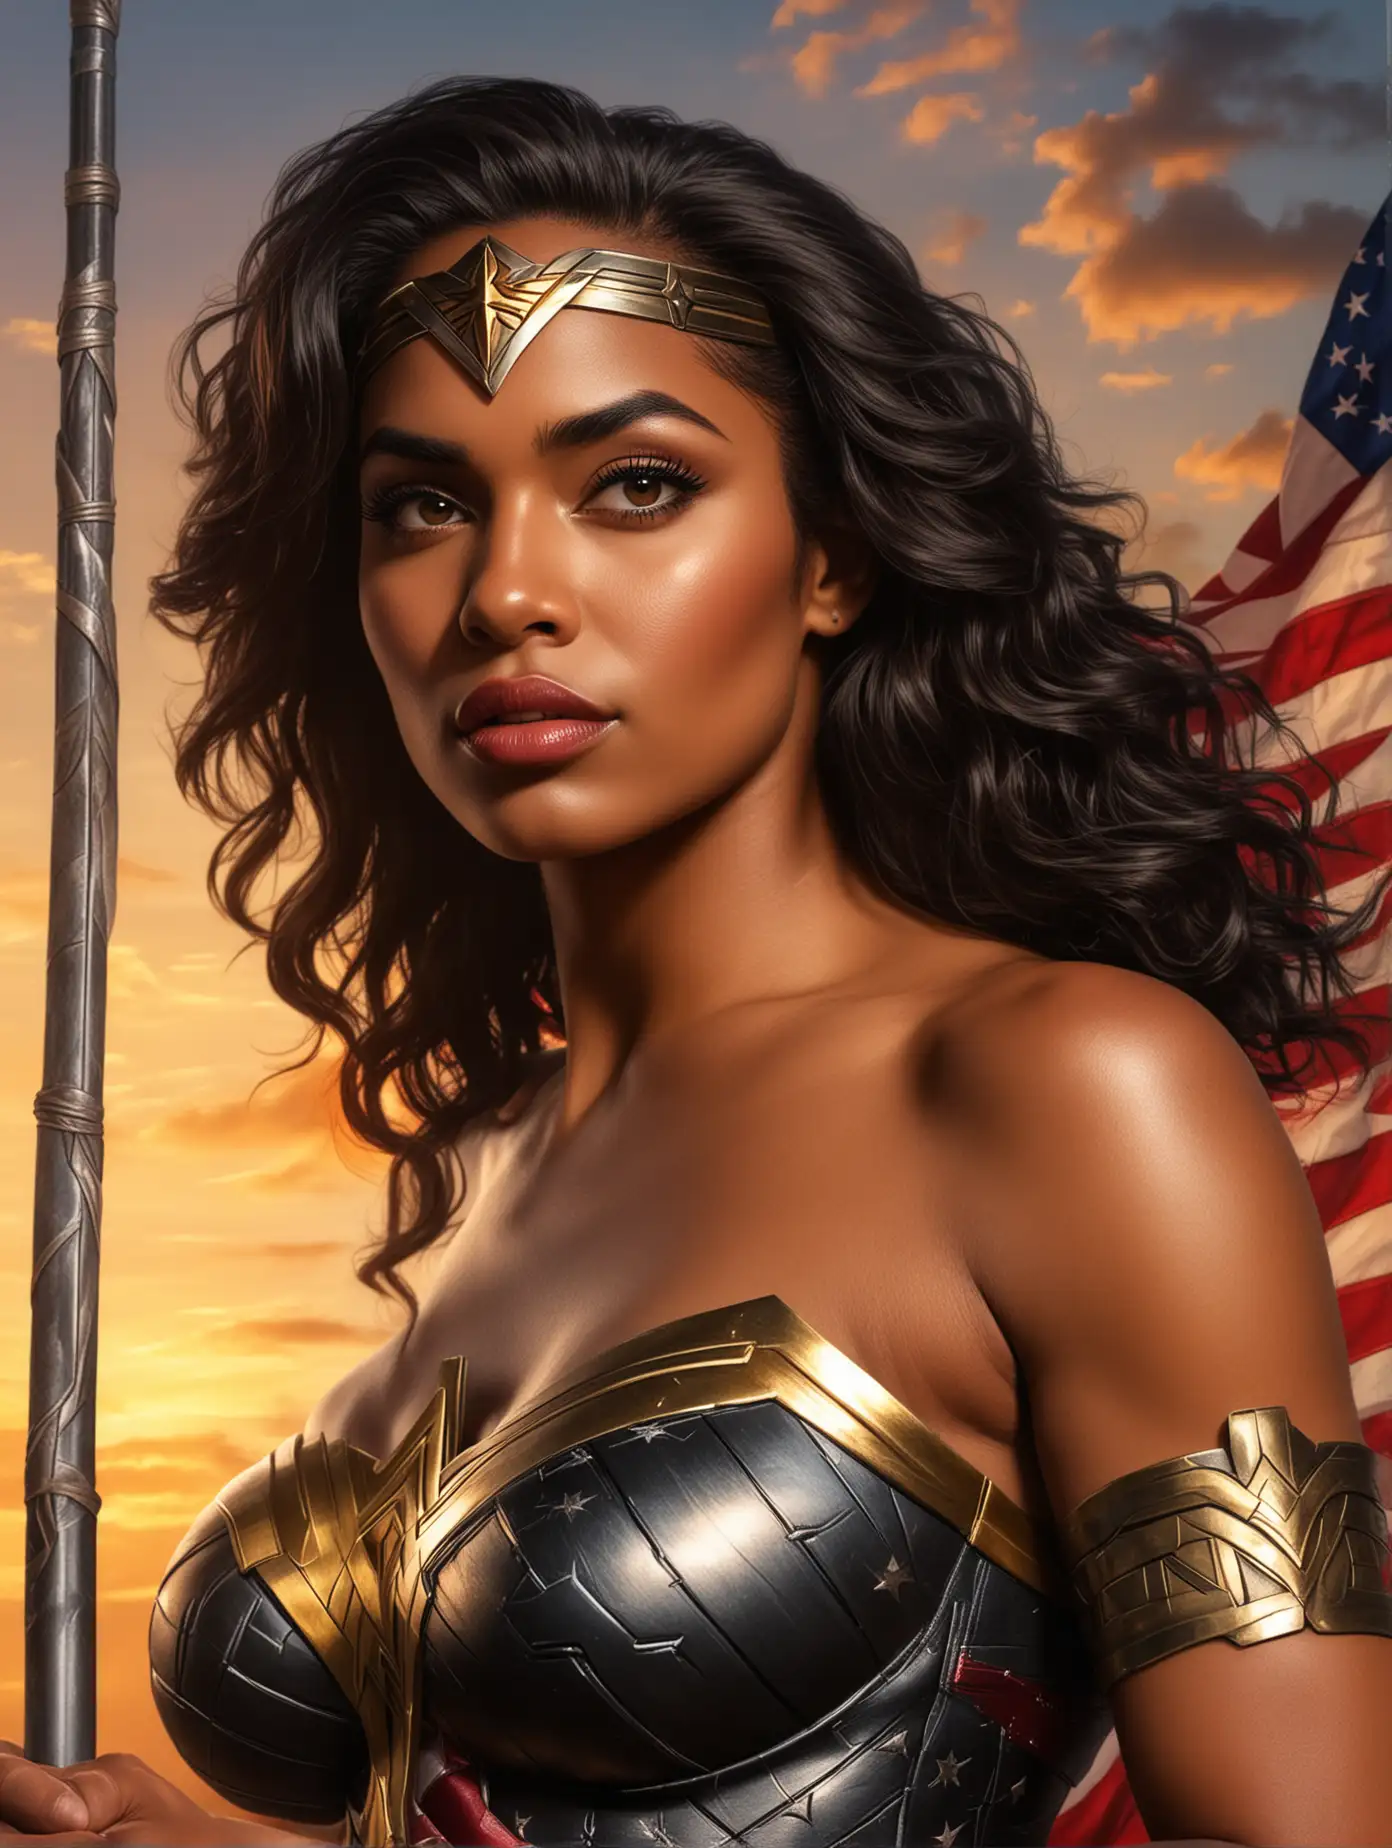 African Diana Prince in Heroic Stance with American Flag Sunset